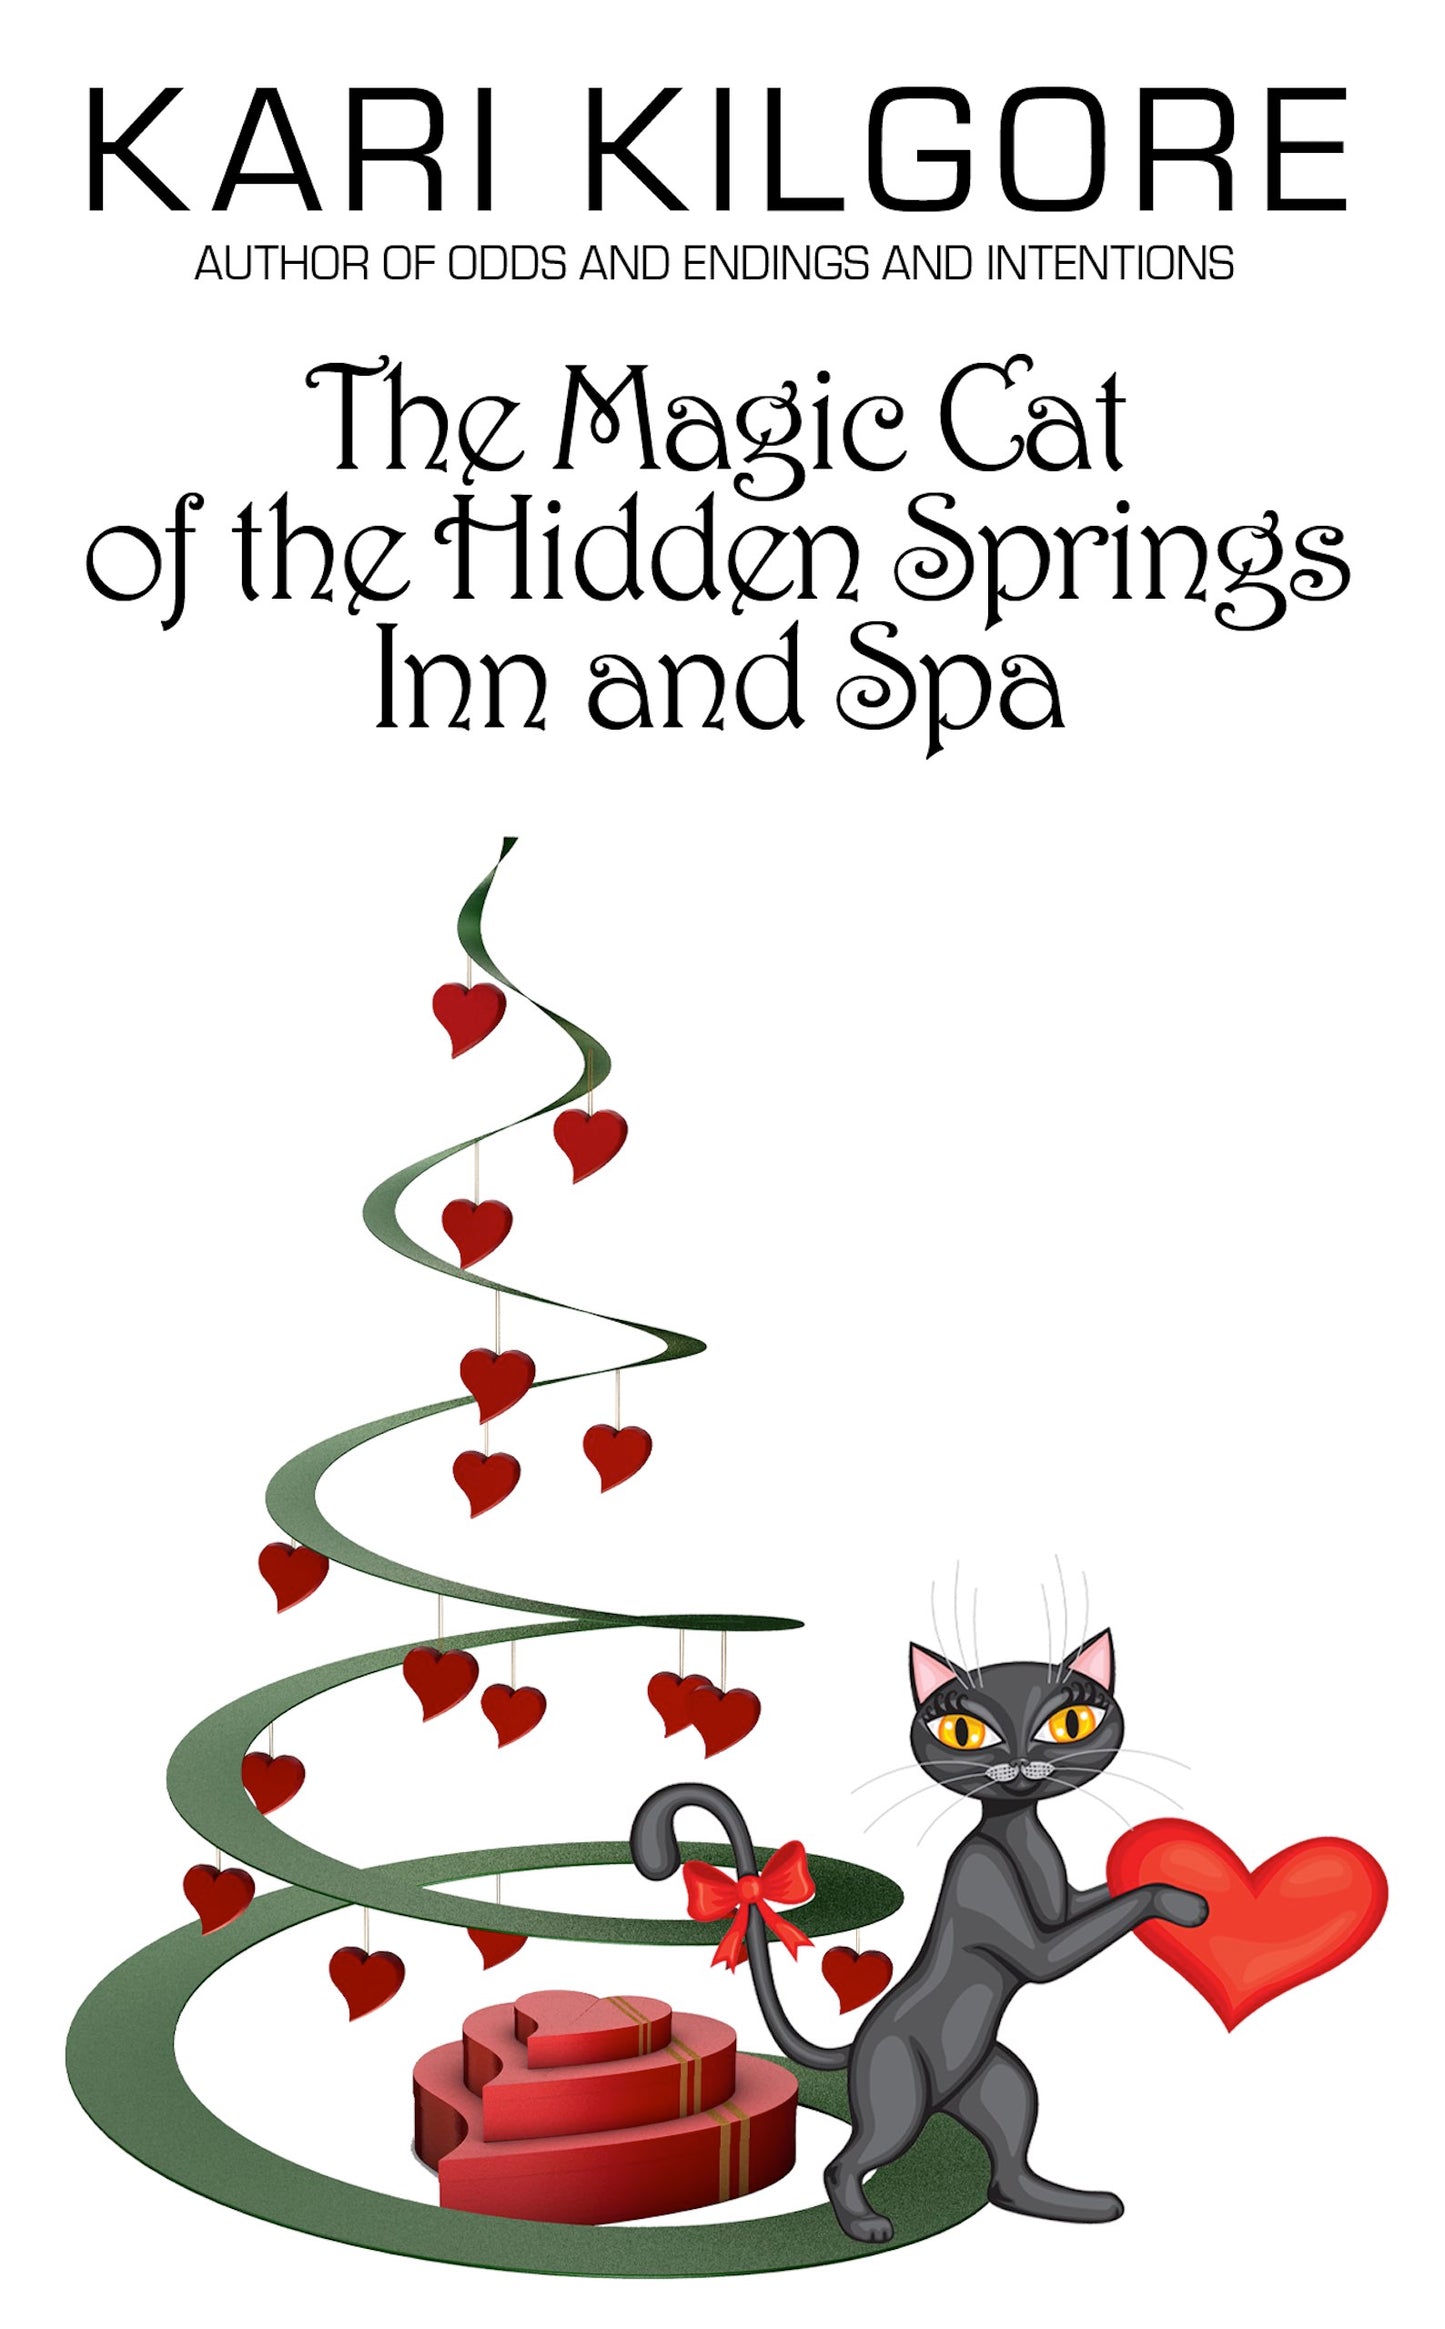 The Magic Cat of the Hidden Springs Inn and Spa